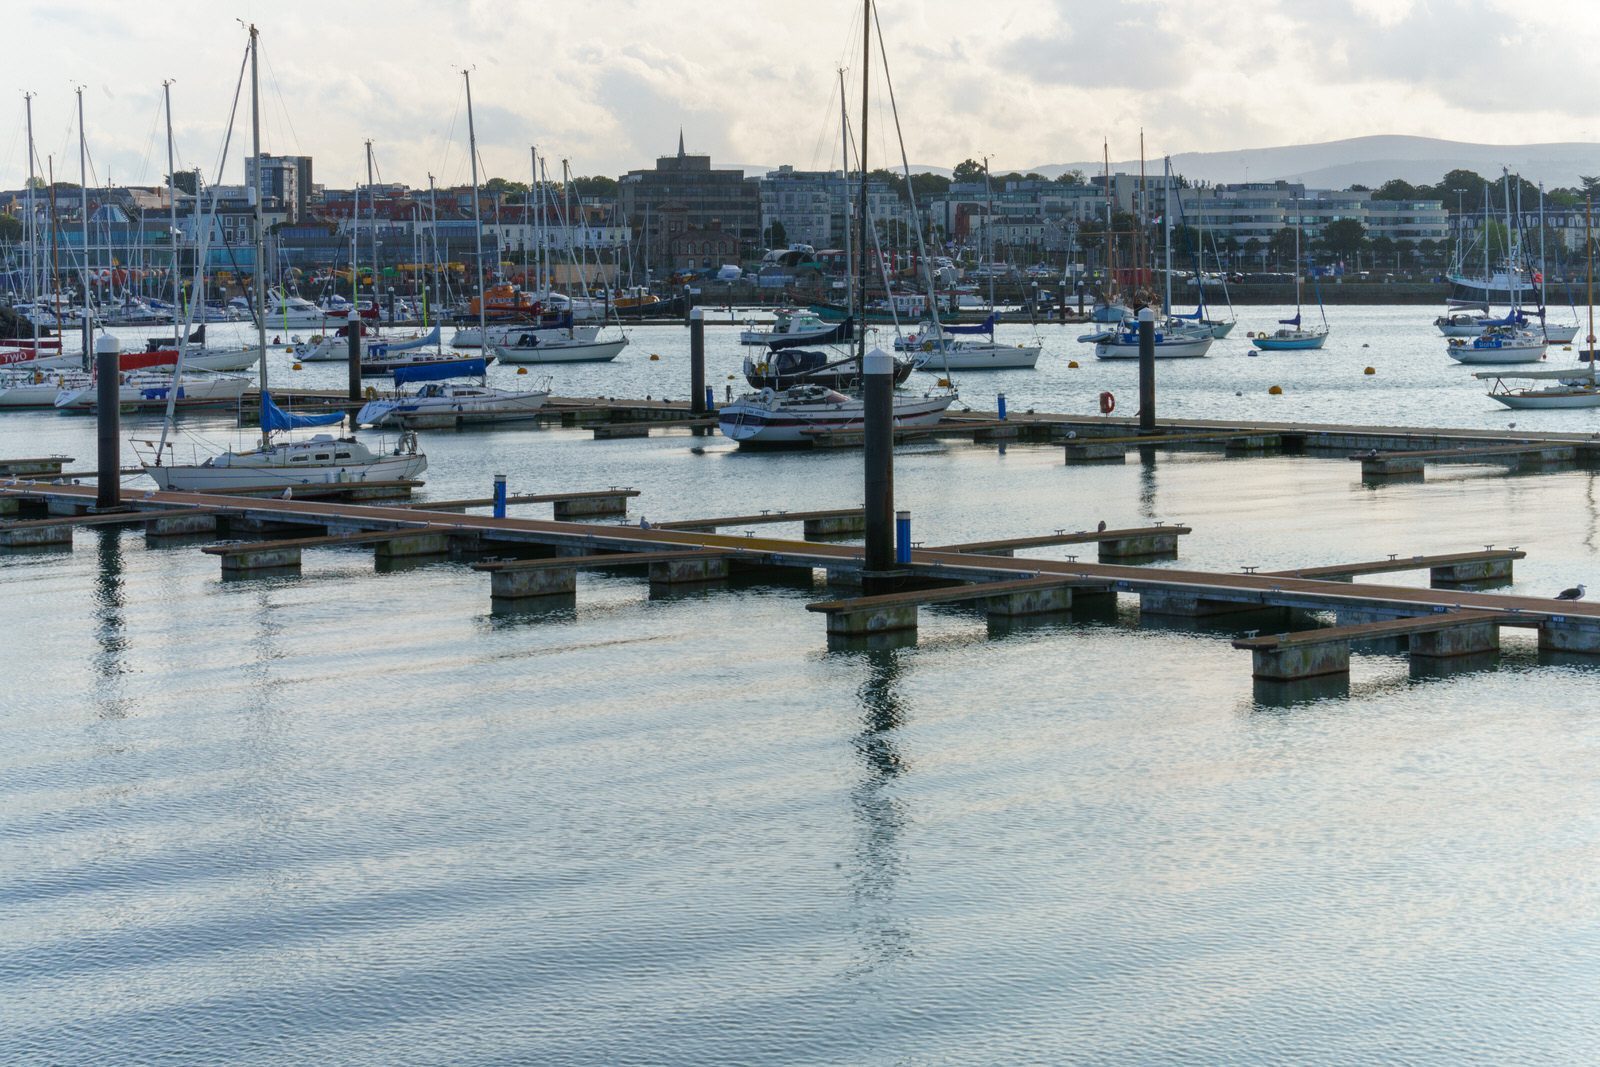 THE SECTION OF THE MARINA NEAR THE WESTERN BREAKWATER [DUN LAOGHAIRE HARBOUR] 005